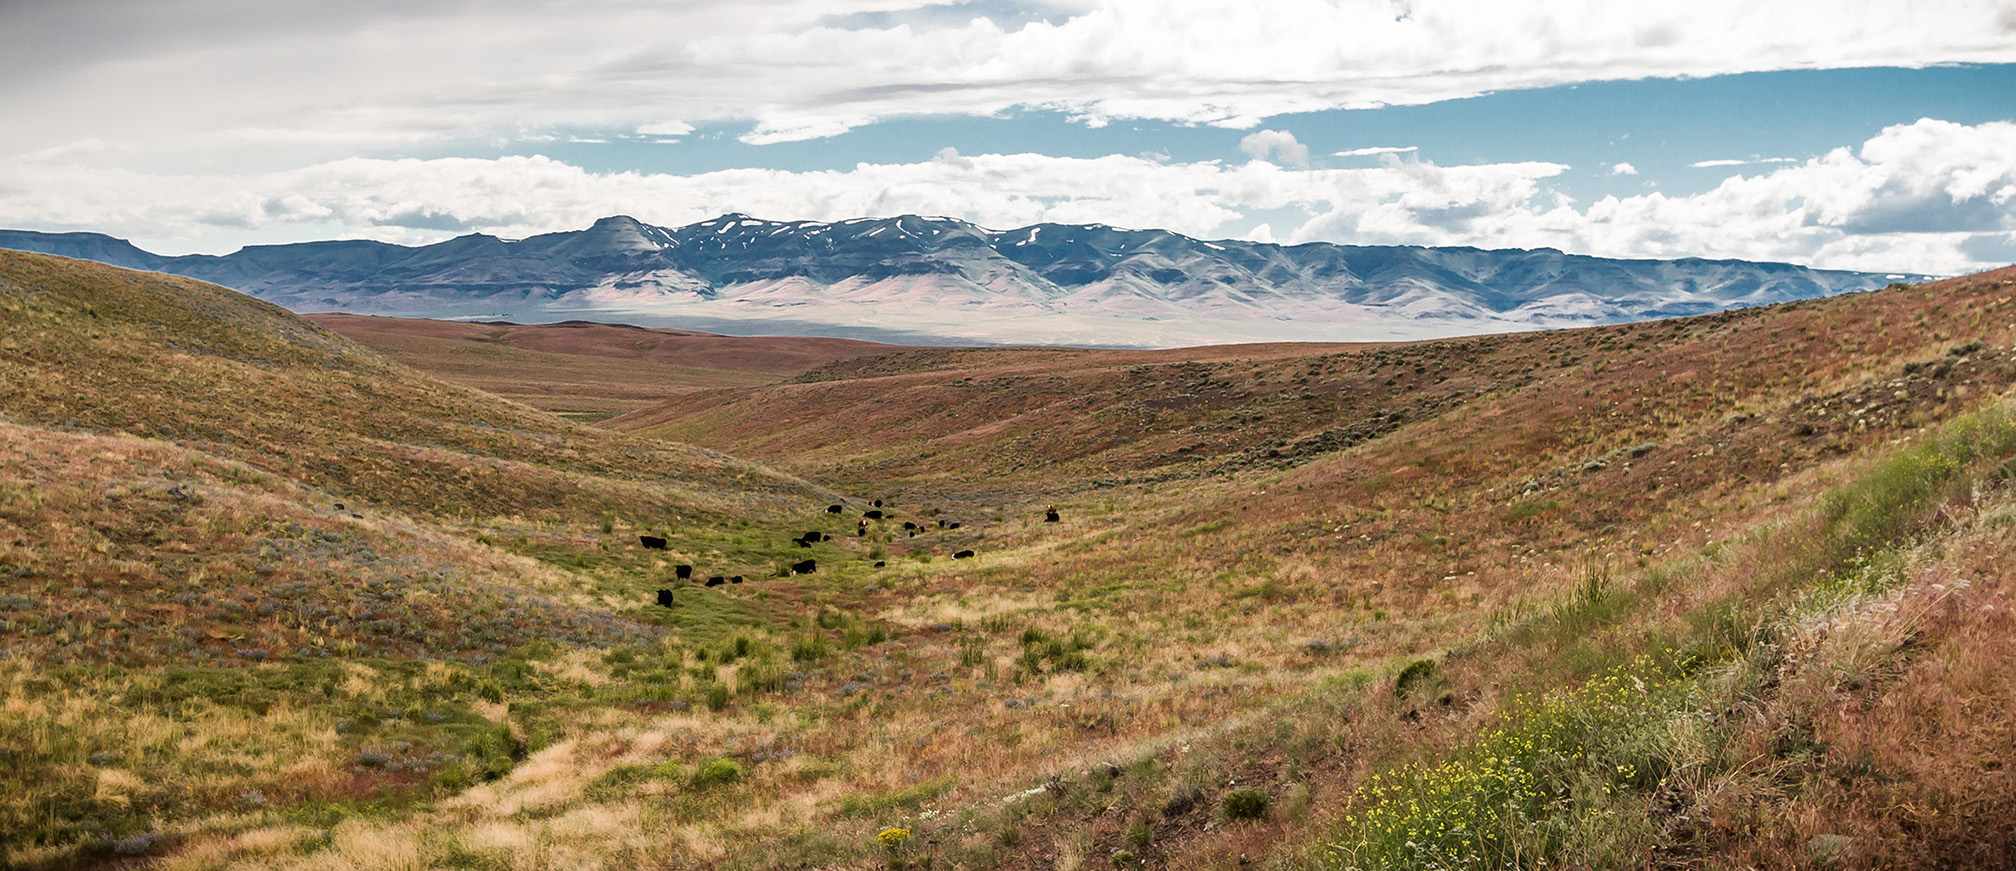 A view of the open treeless rangelands of Eastern Oregon. We are looking down a small valley that curves gently to the left. A creek flows along it, marked by grren grass that contrasts with the browner vegetation of the rangeland. Black cattle graze the green grass. In the distance mountains rise to the clouds.